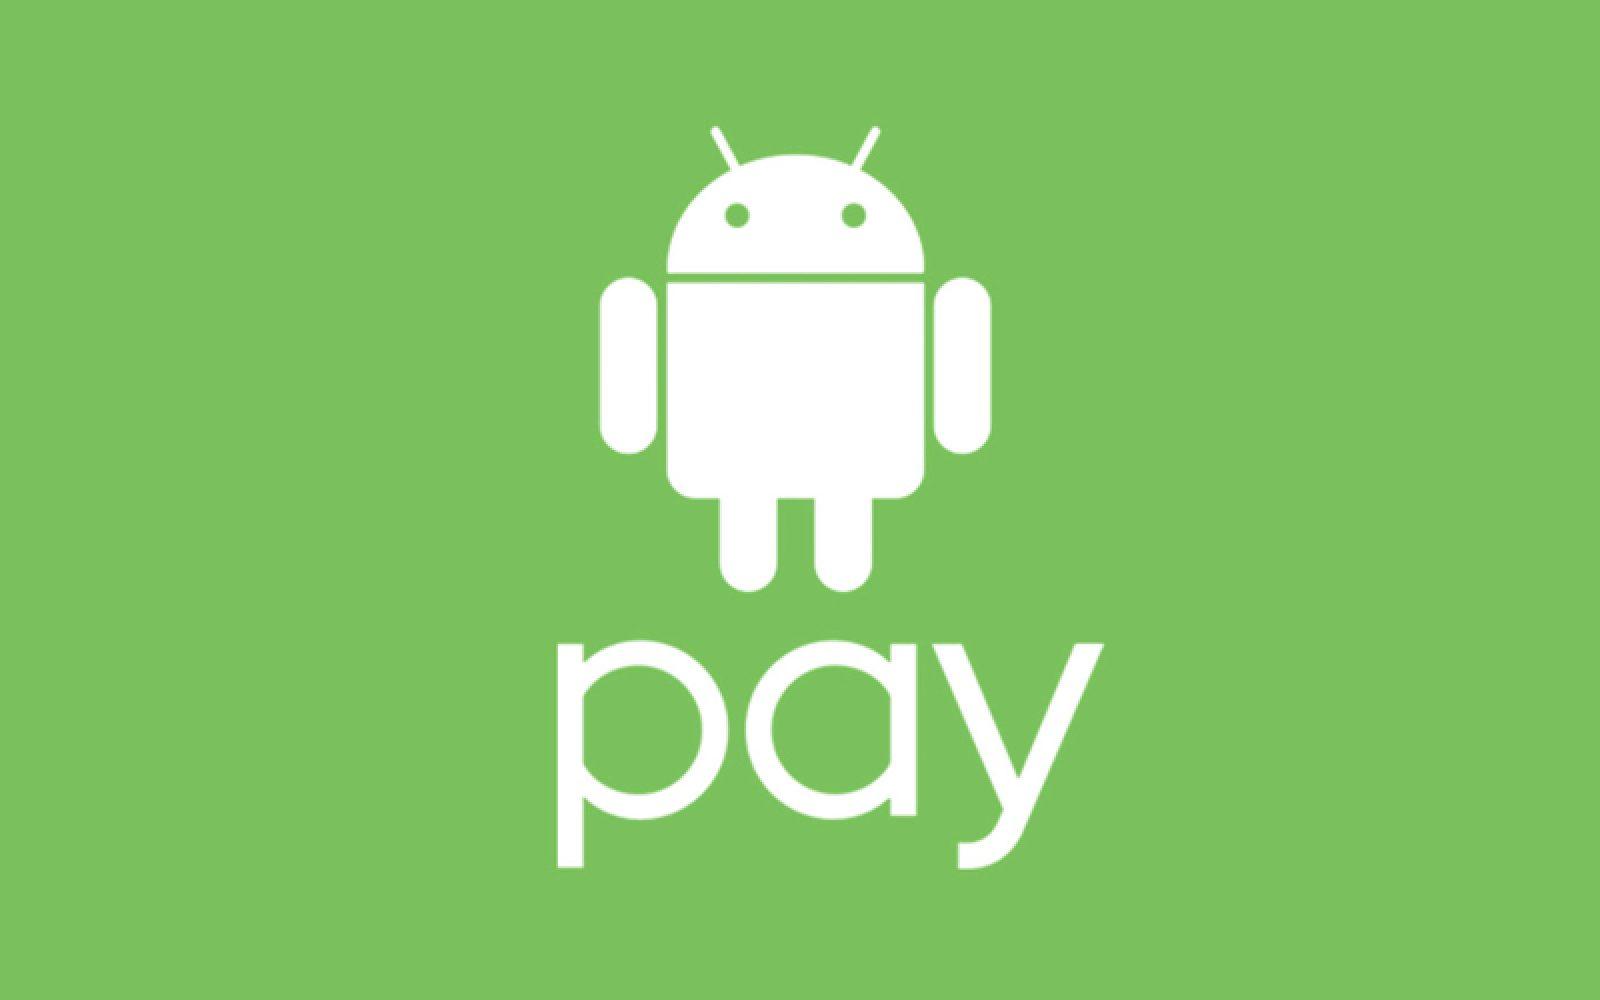 Official Android Pay Logo - It's official: Android Pay is coming to the UK within the next few